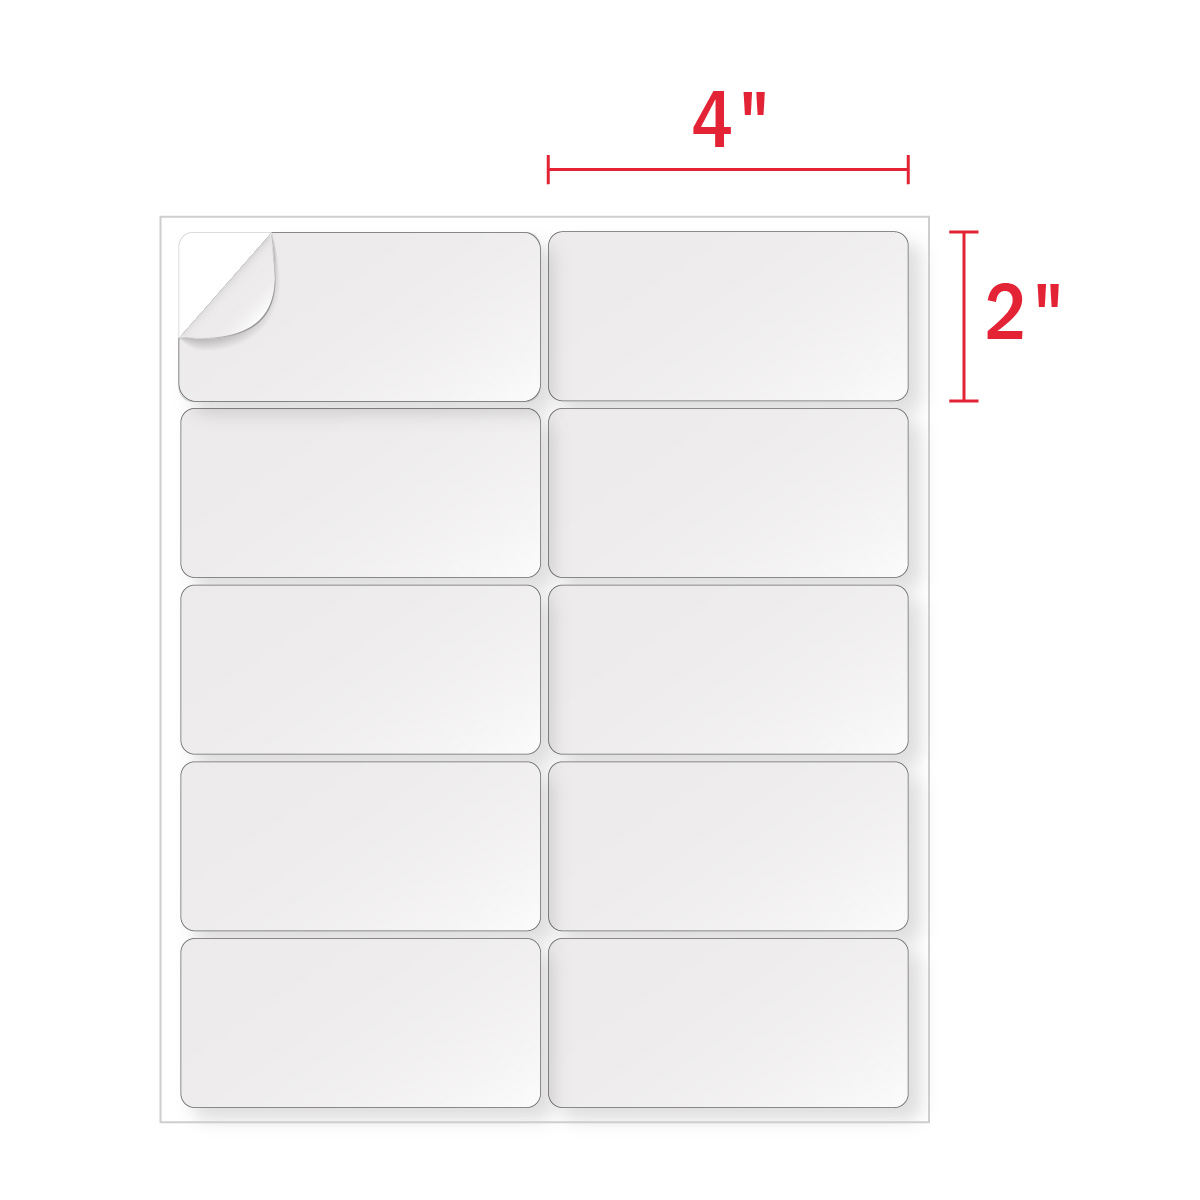 29 Avery 2x4 Shipping Label Template Labels 2021 - vrogue.co